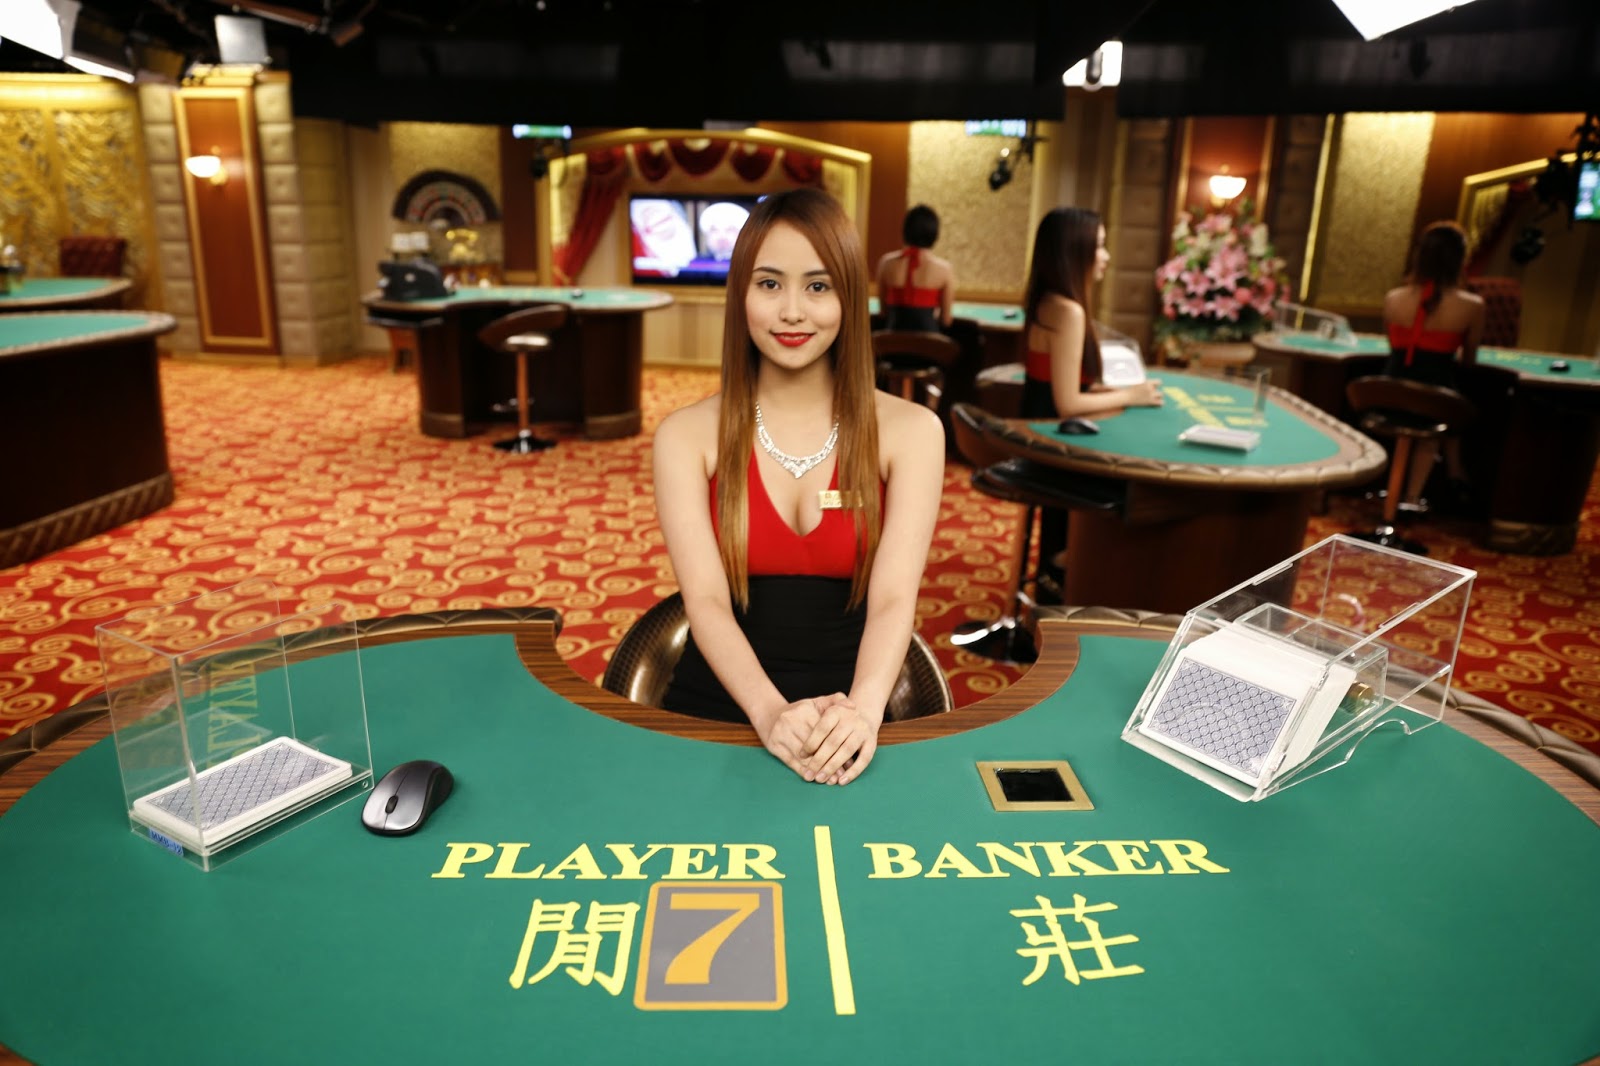 M88 Mansion Malaysia Online Sports Bookie, Live Casino, Poker, and  Promotion.: M88 Mansion Malaysia, Live Casino, Online Gaming, Baccarat,  Dragon Tiger, Sic Bo, Roulette, 7 Up Bacarrat, 3 Picture, BlackJack, Texas  Hold&#39;em